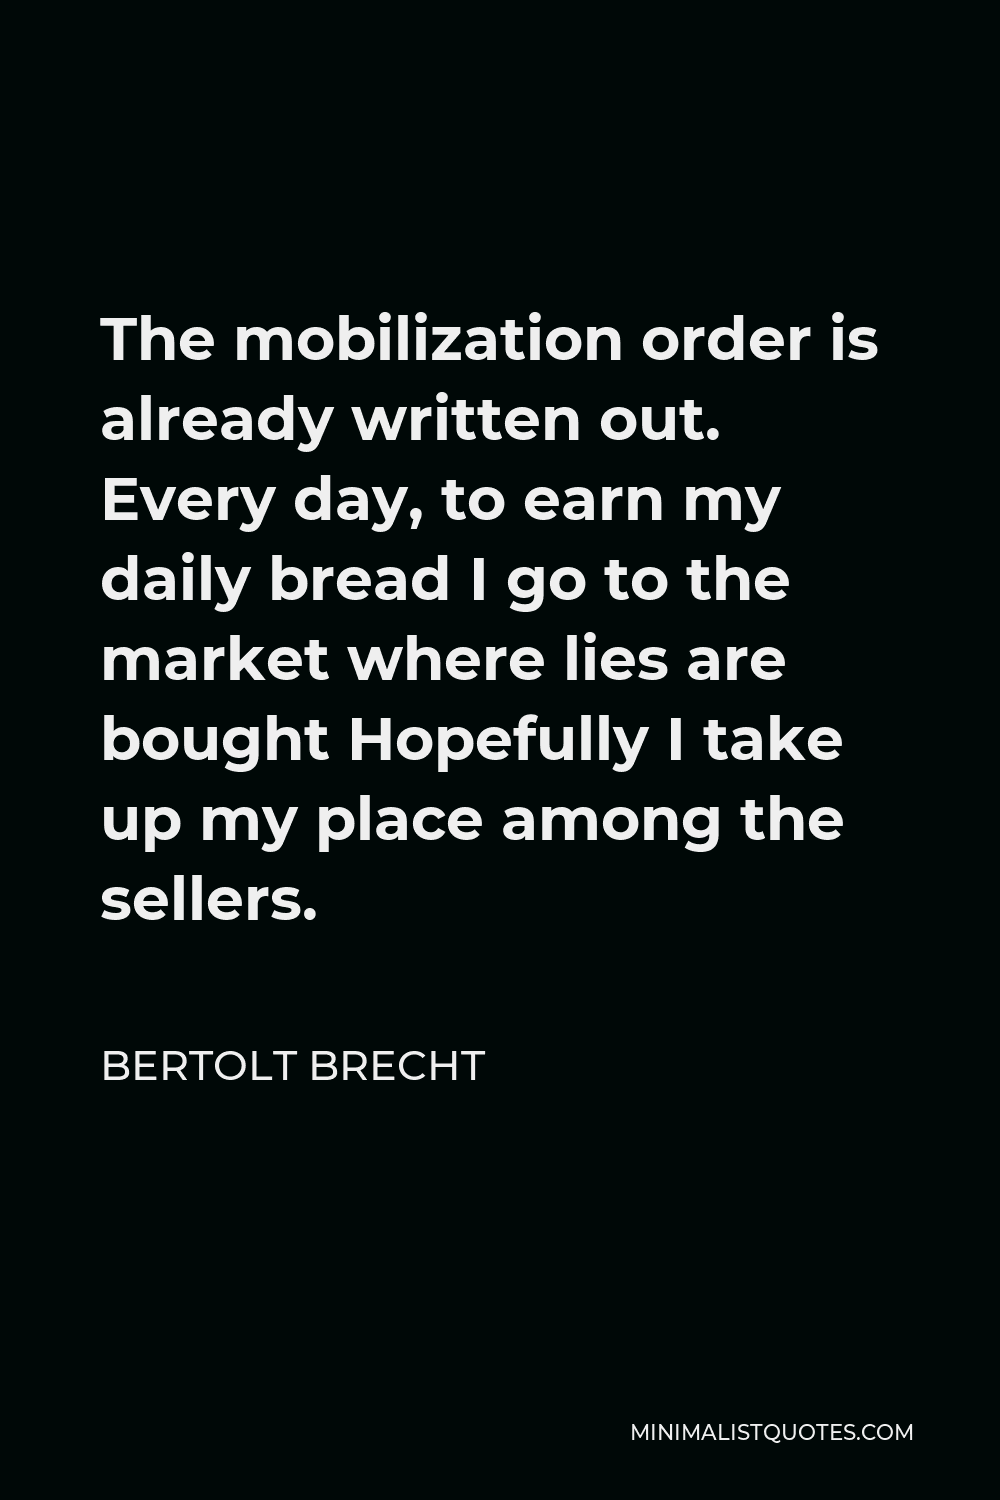 Bertolt Brecht Quote - The mobilization order is already written out. Every day, to earn my daily bread I go to the market where lies are bought Hopefully I take up my place among the sellers.